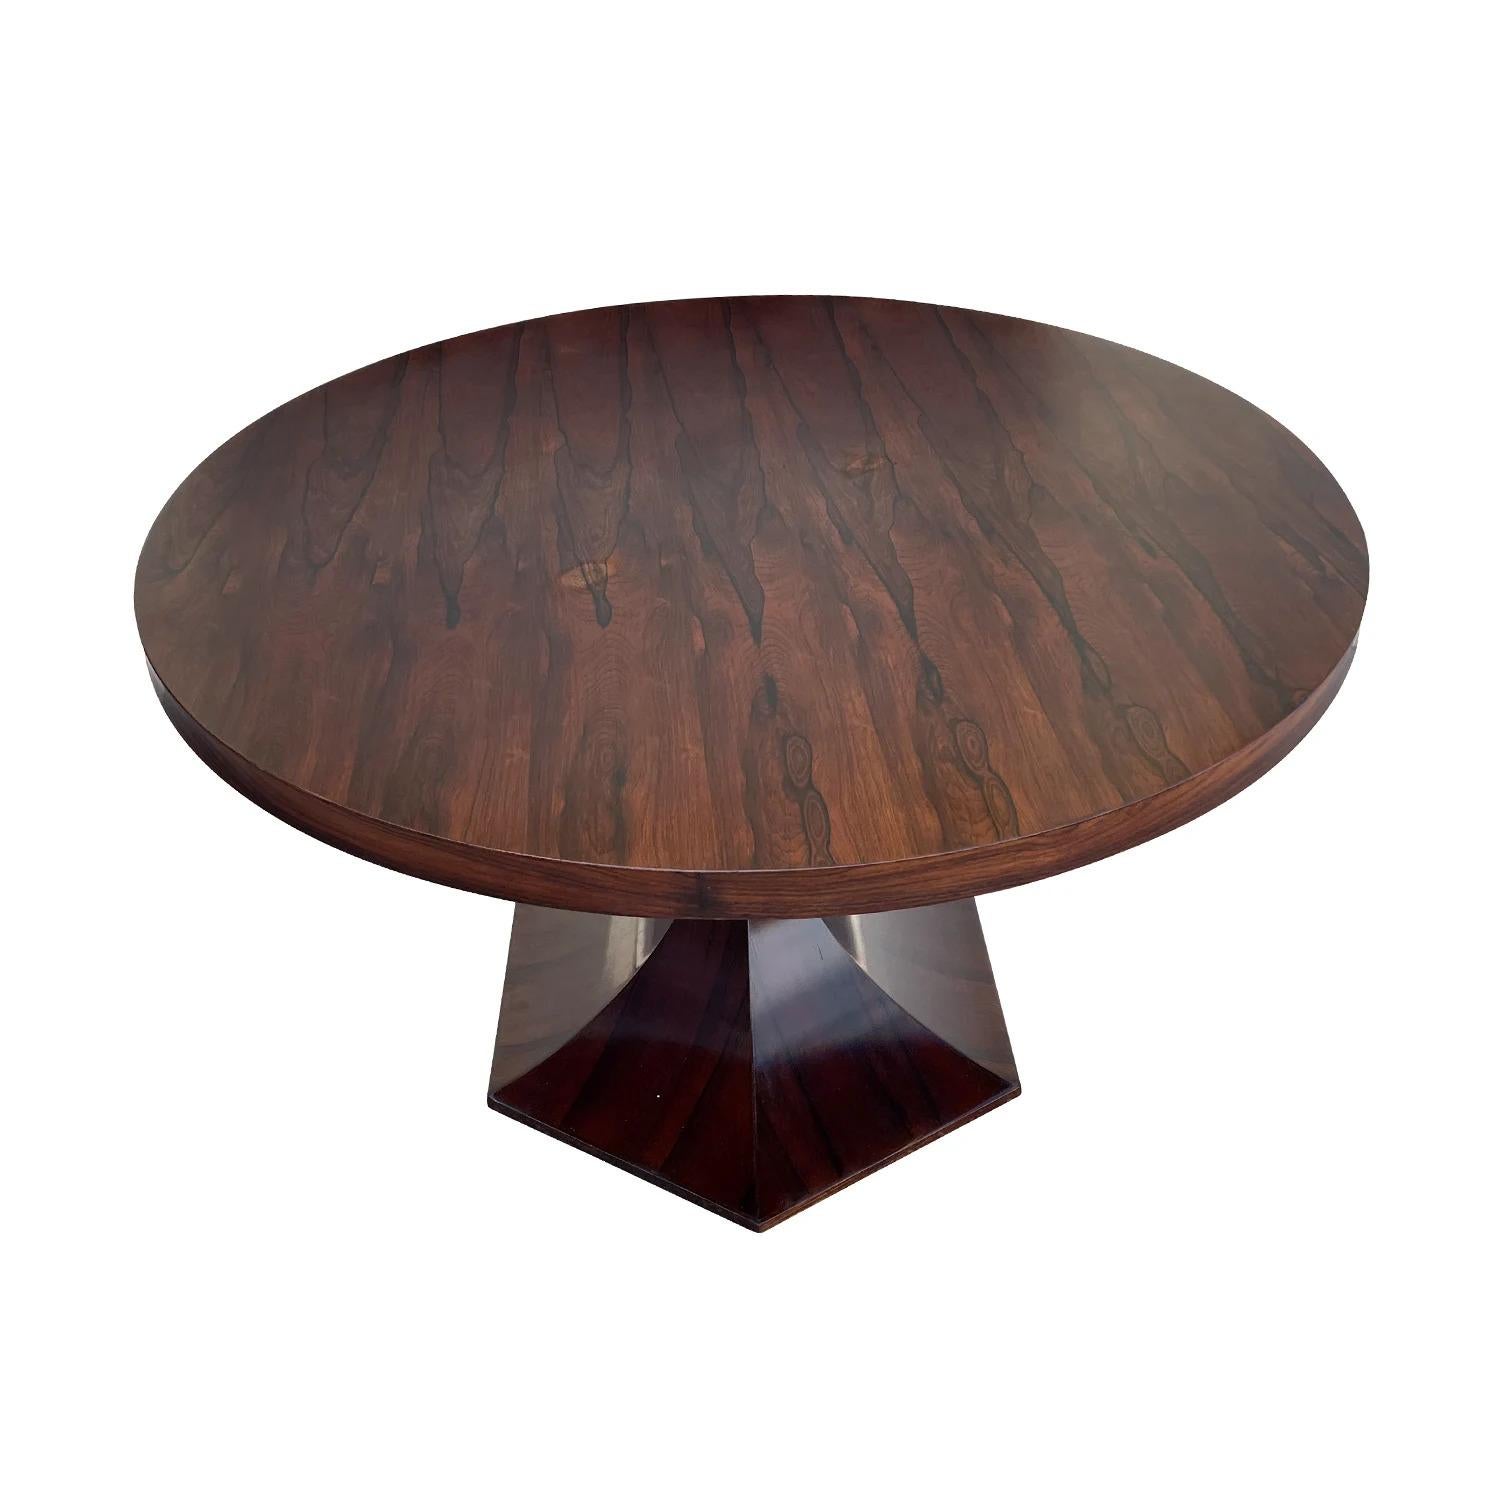 20th Century Italian Modern Vintage Polished Rosewood Dining, Center Table In Good Condition For Sale In West Palm Beach, FL